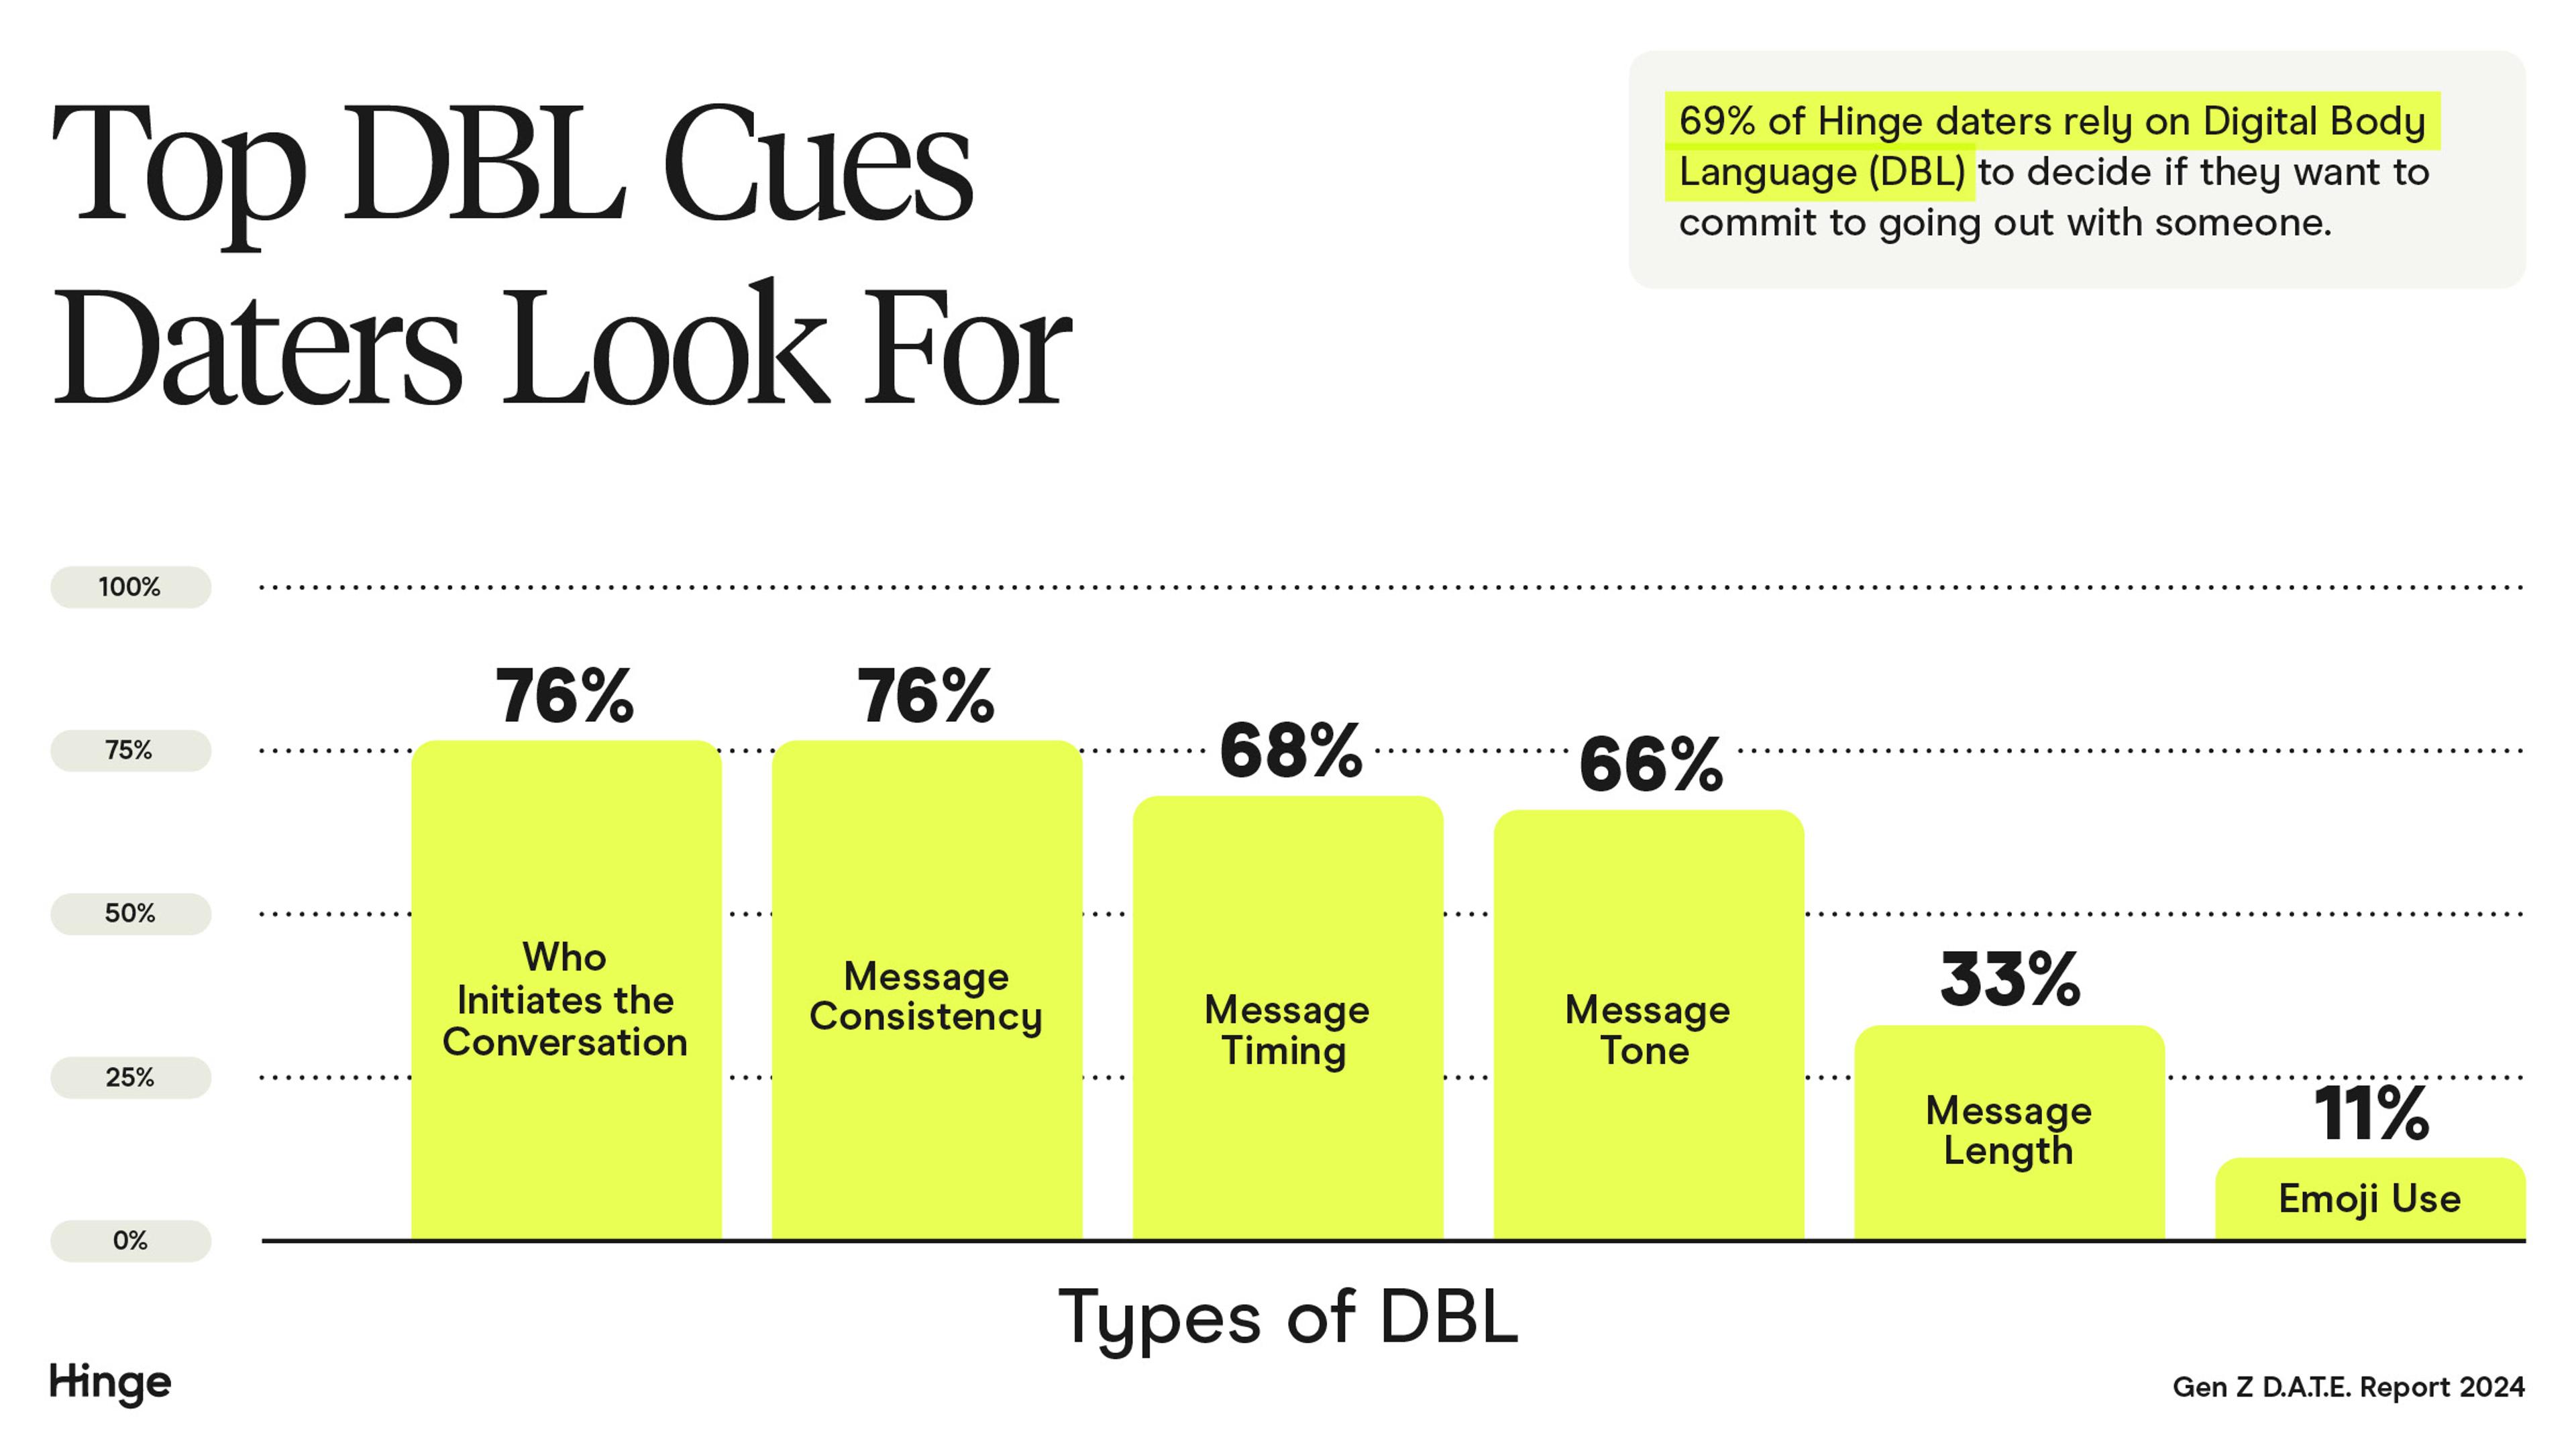 Top DBL Cues Daters Look For